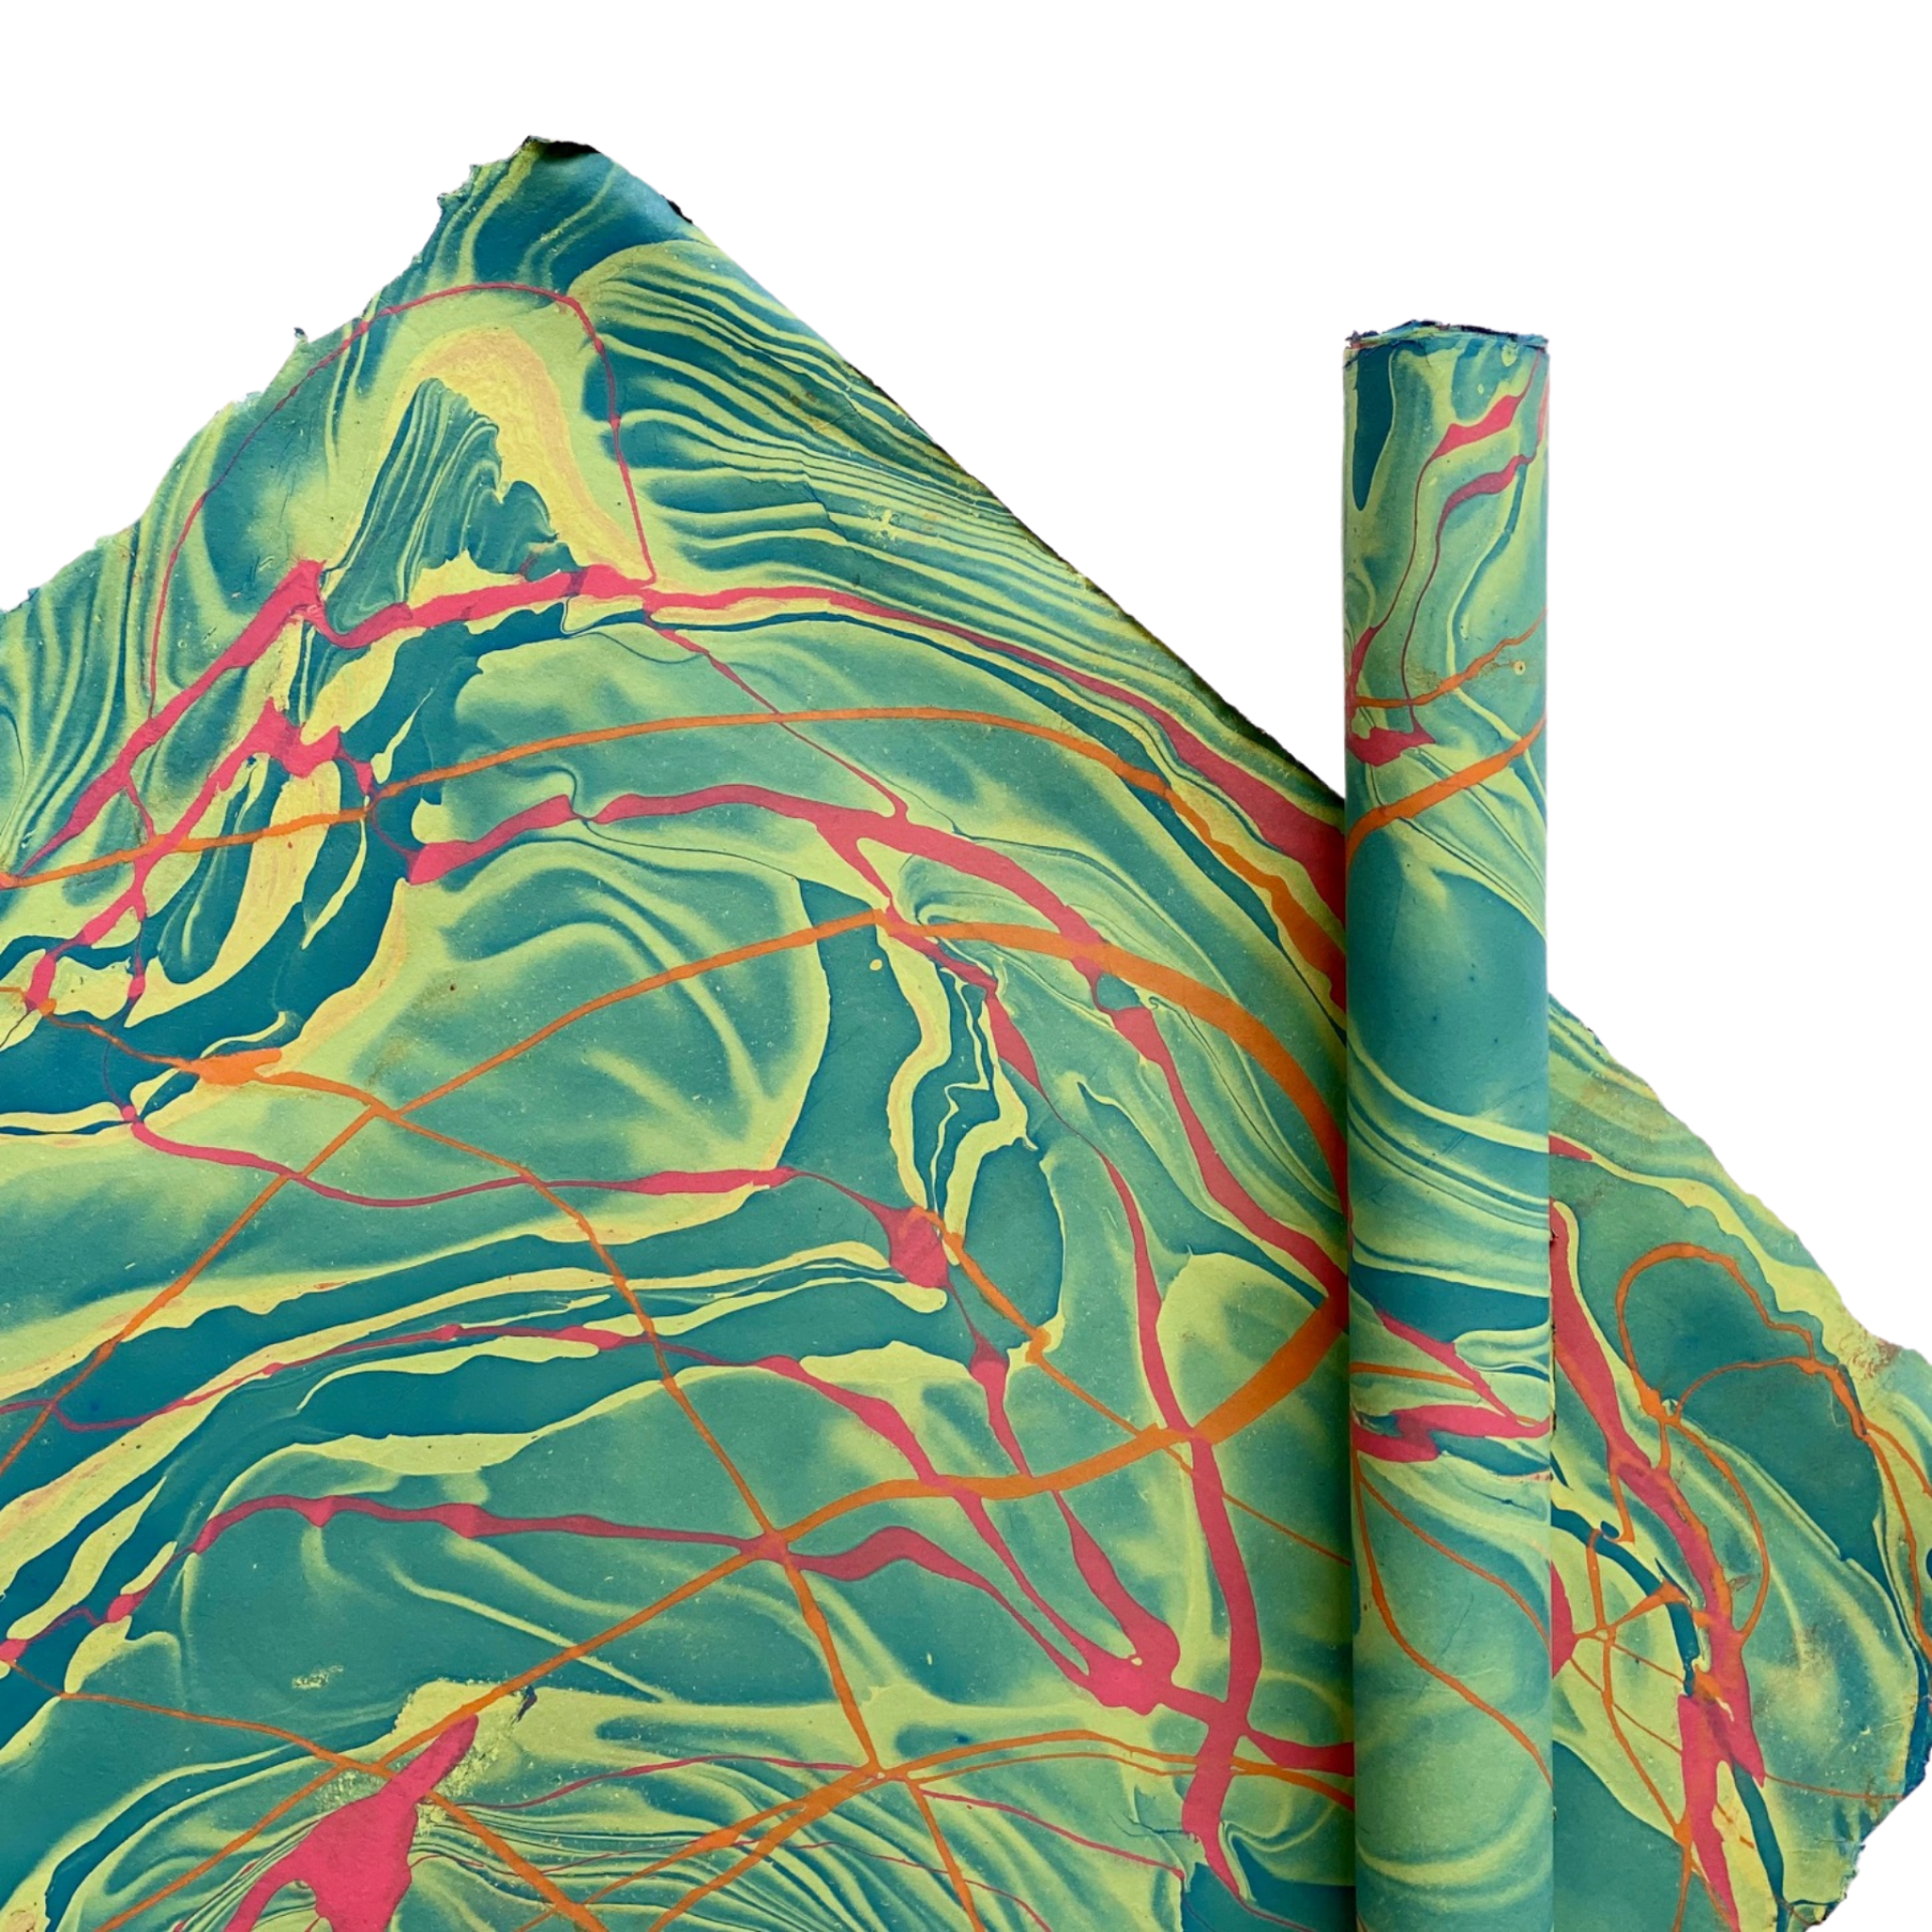 Multi-Color Marbled Handmade Paper Gift Wrap Sheet